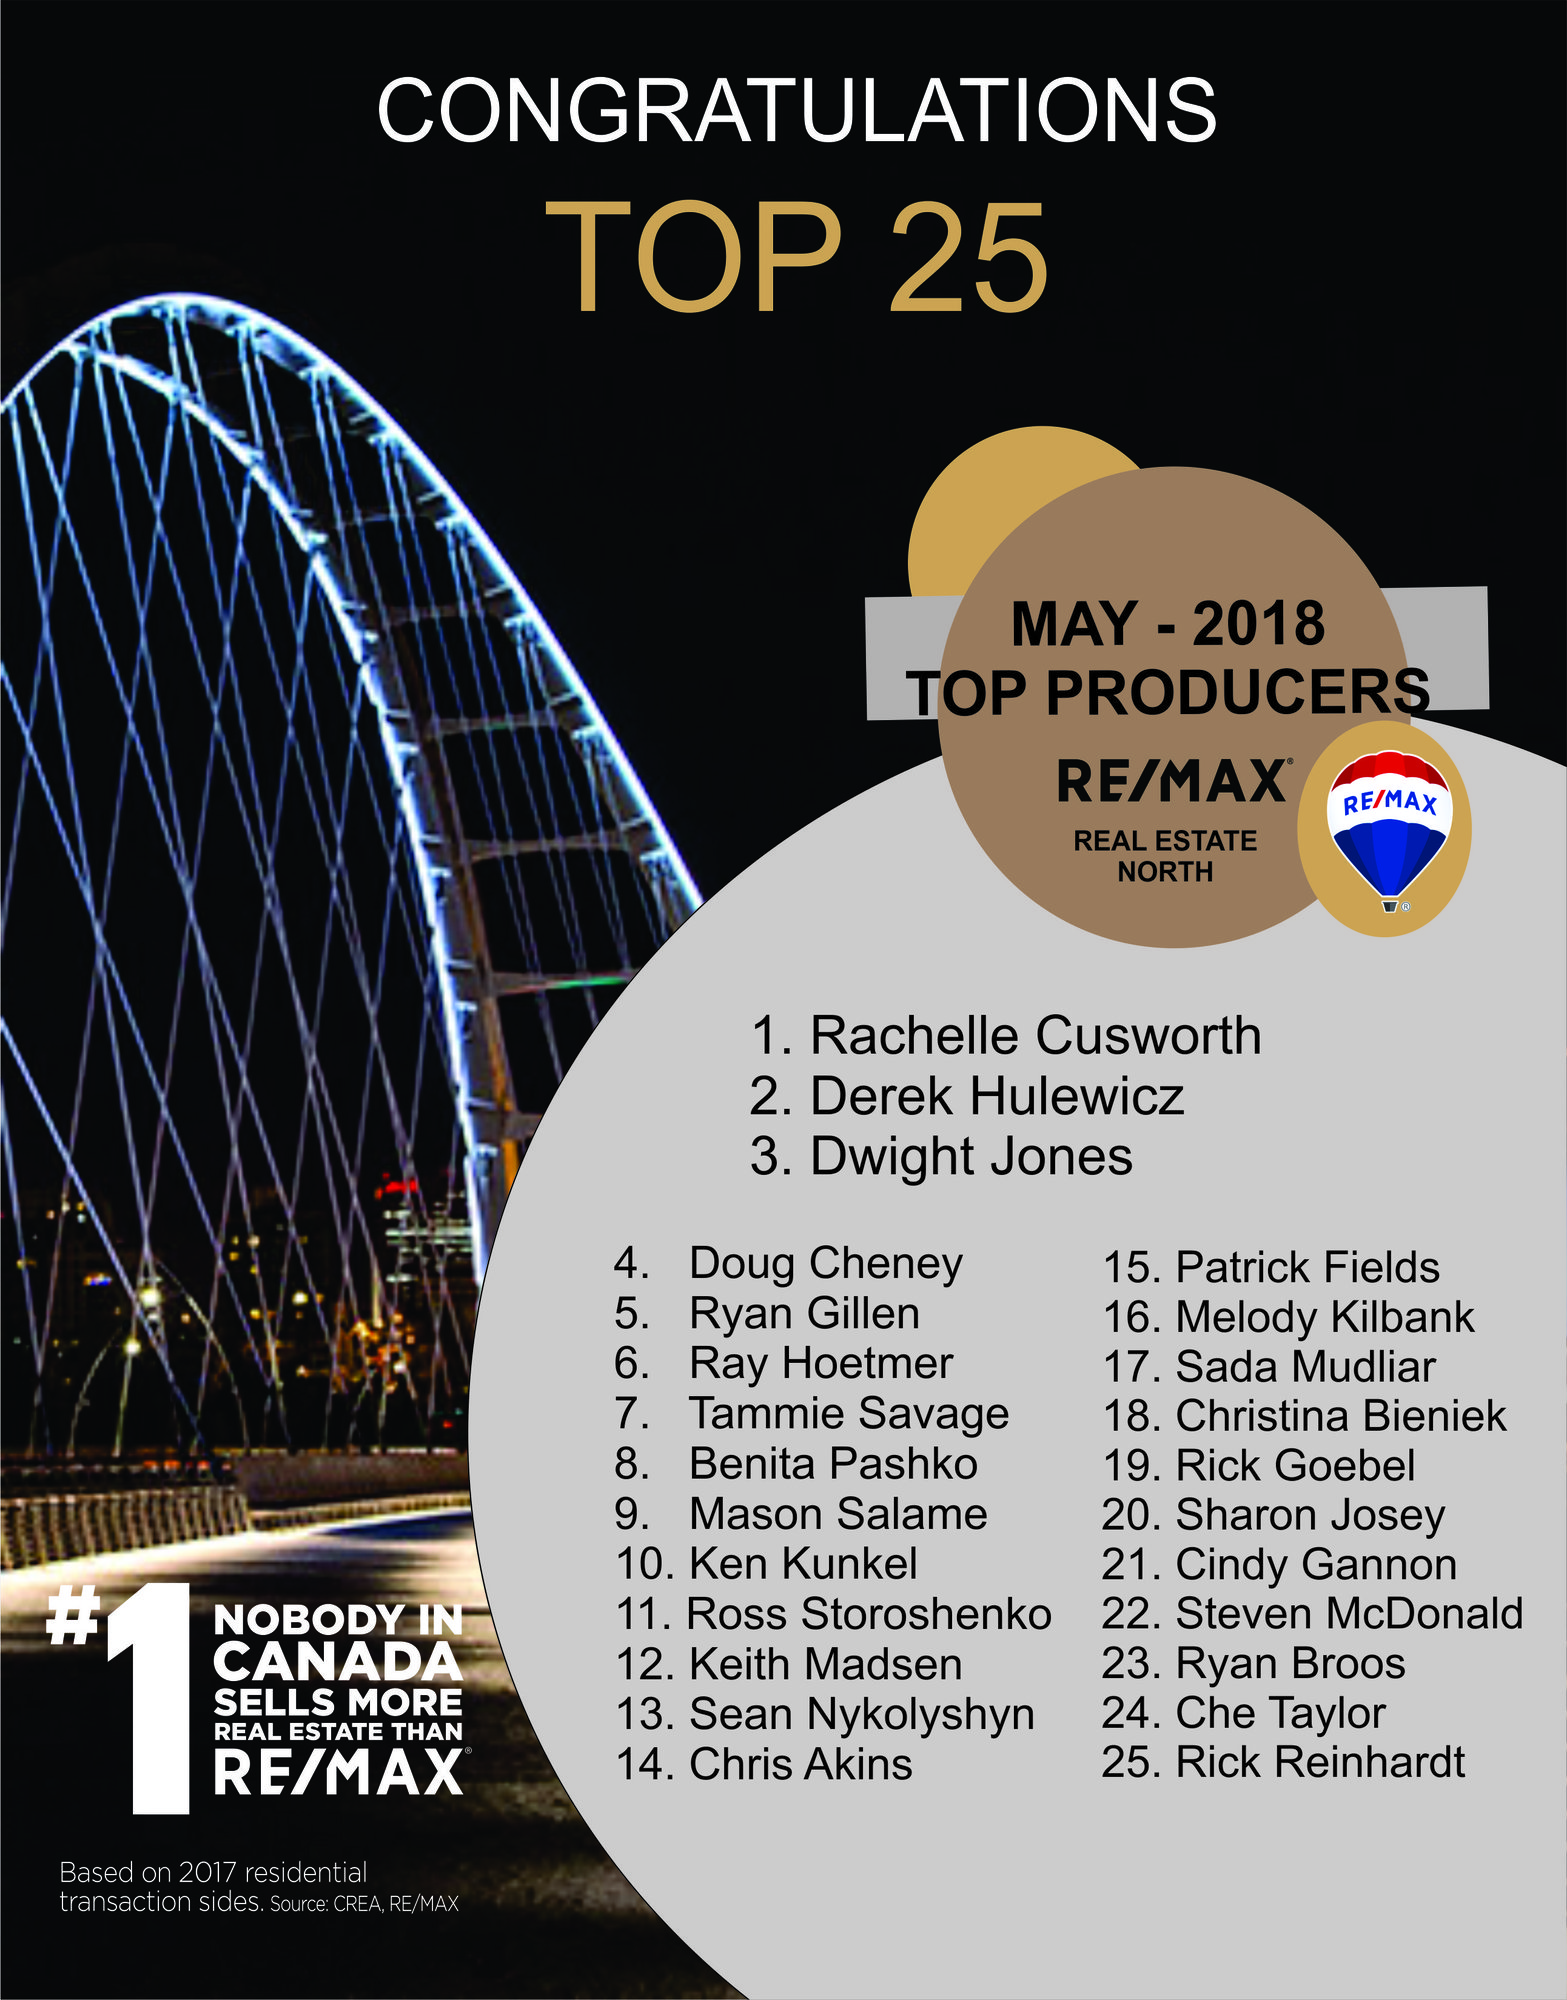 top producer list for remax realtors for may of 2018